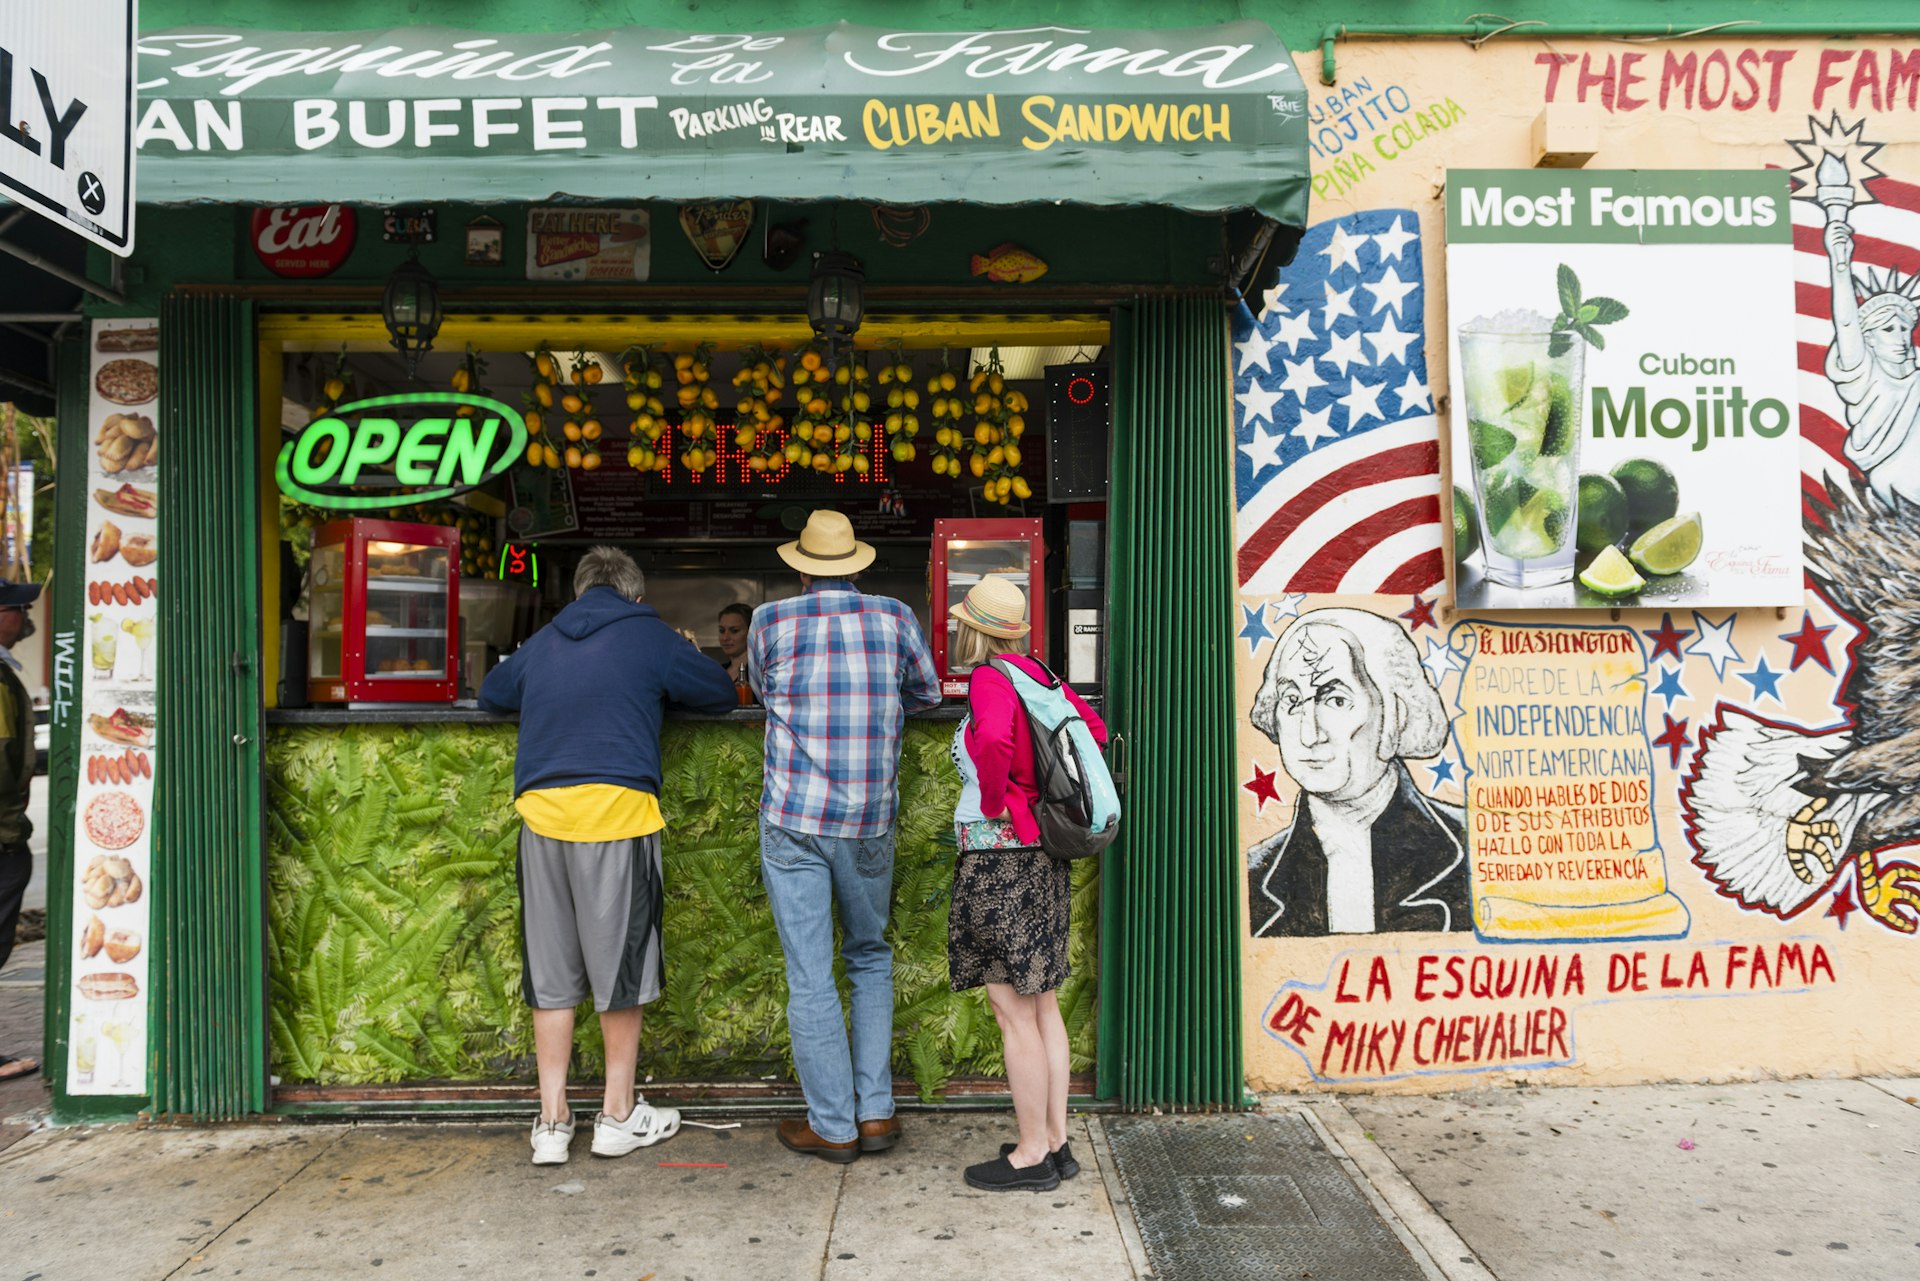 Three people stand to order from the open air countertop of a restaurant selling Cuban food and drinks on historic Calle Ocho in Little Havana, Miami